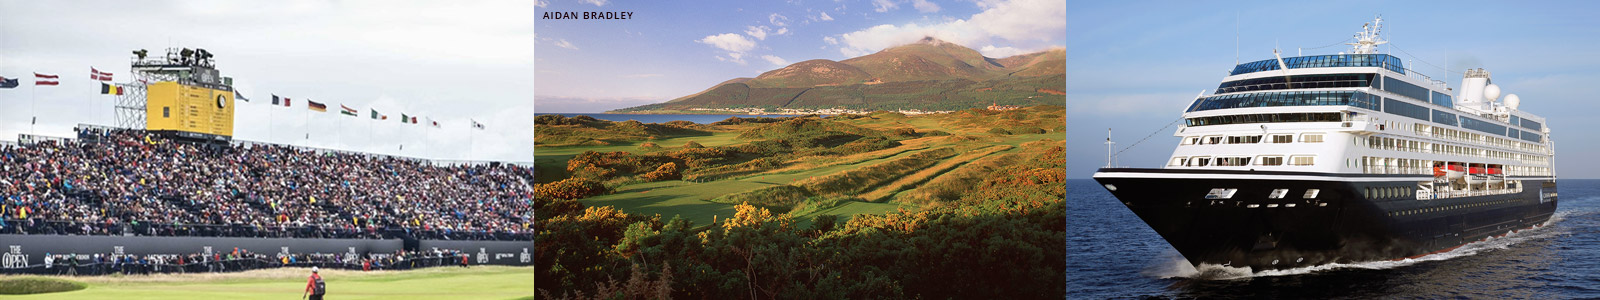 British Golf The Open Championship Packages and Golf Cruises